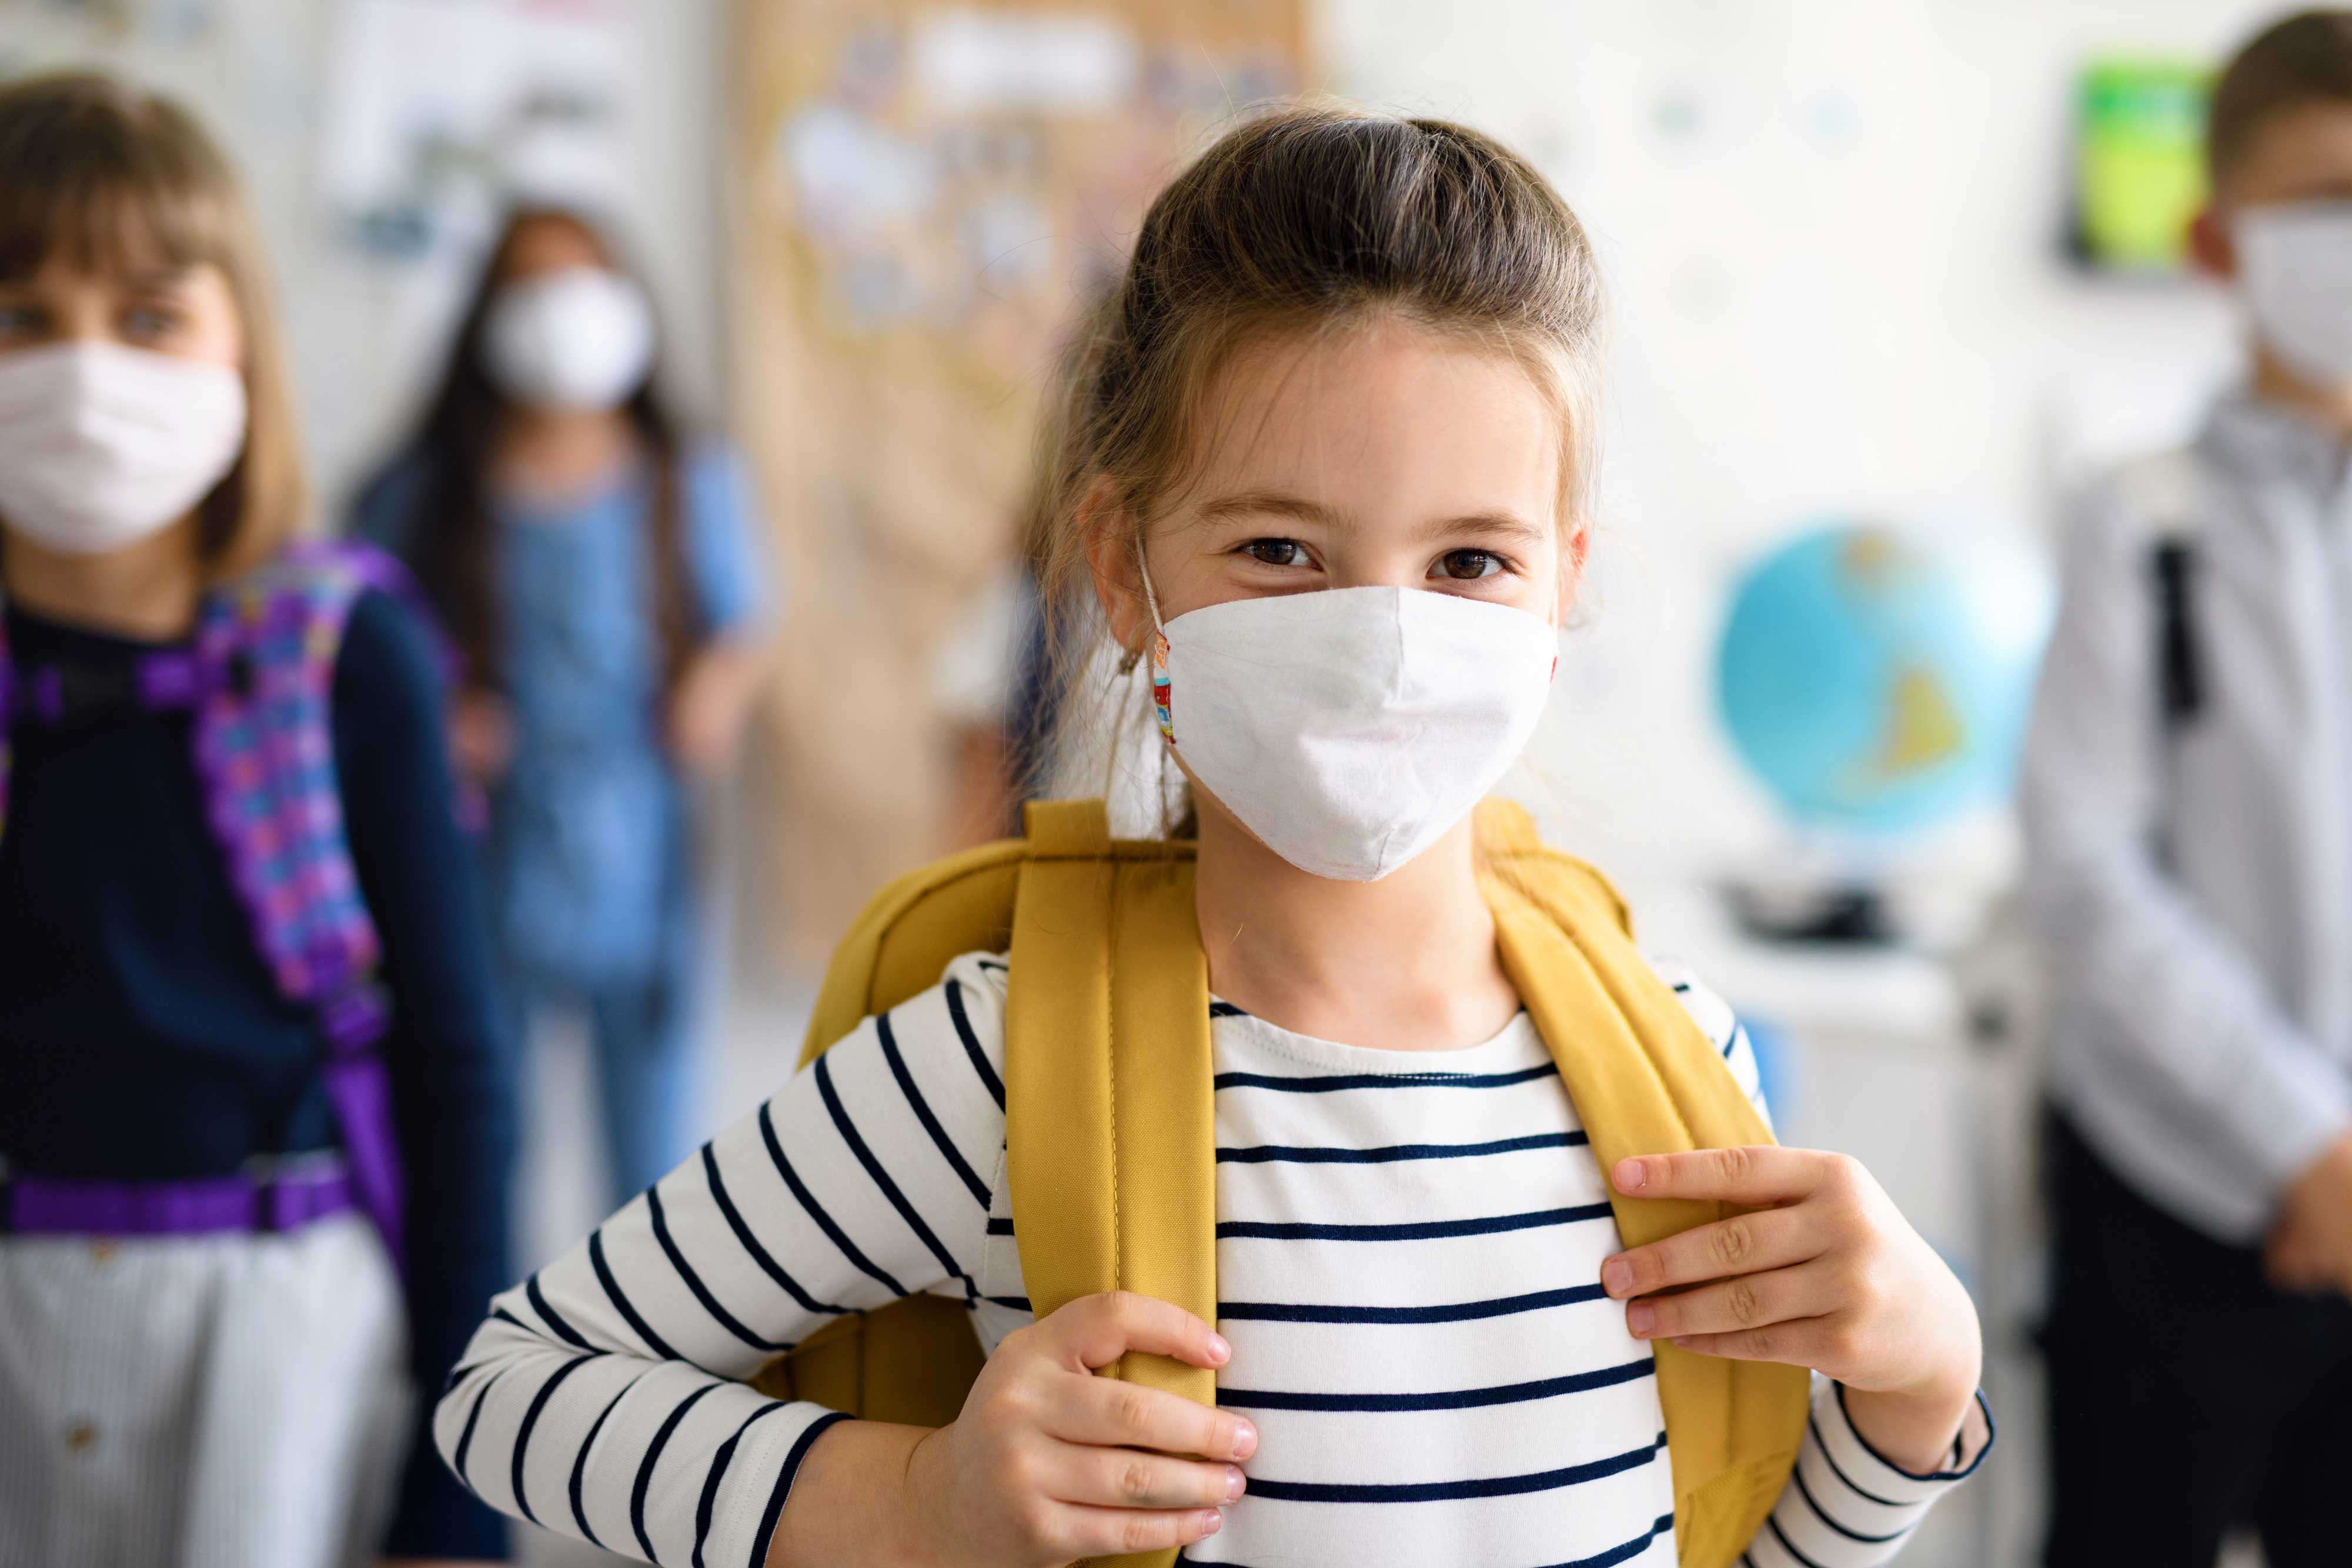 Elementary school student with mask and backpack